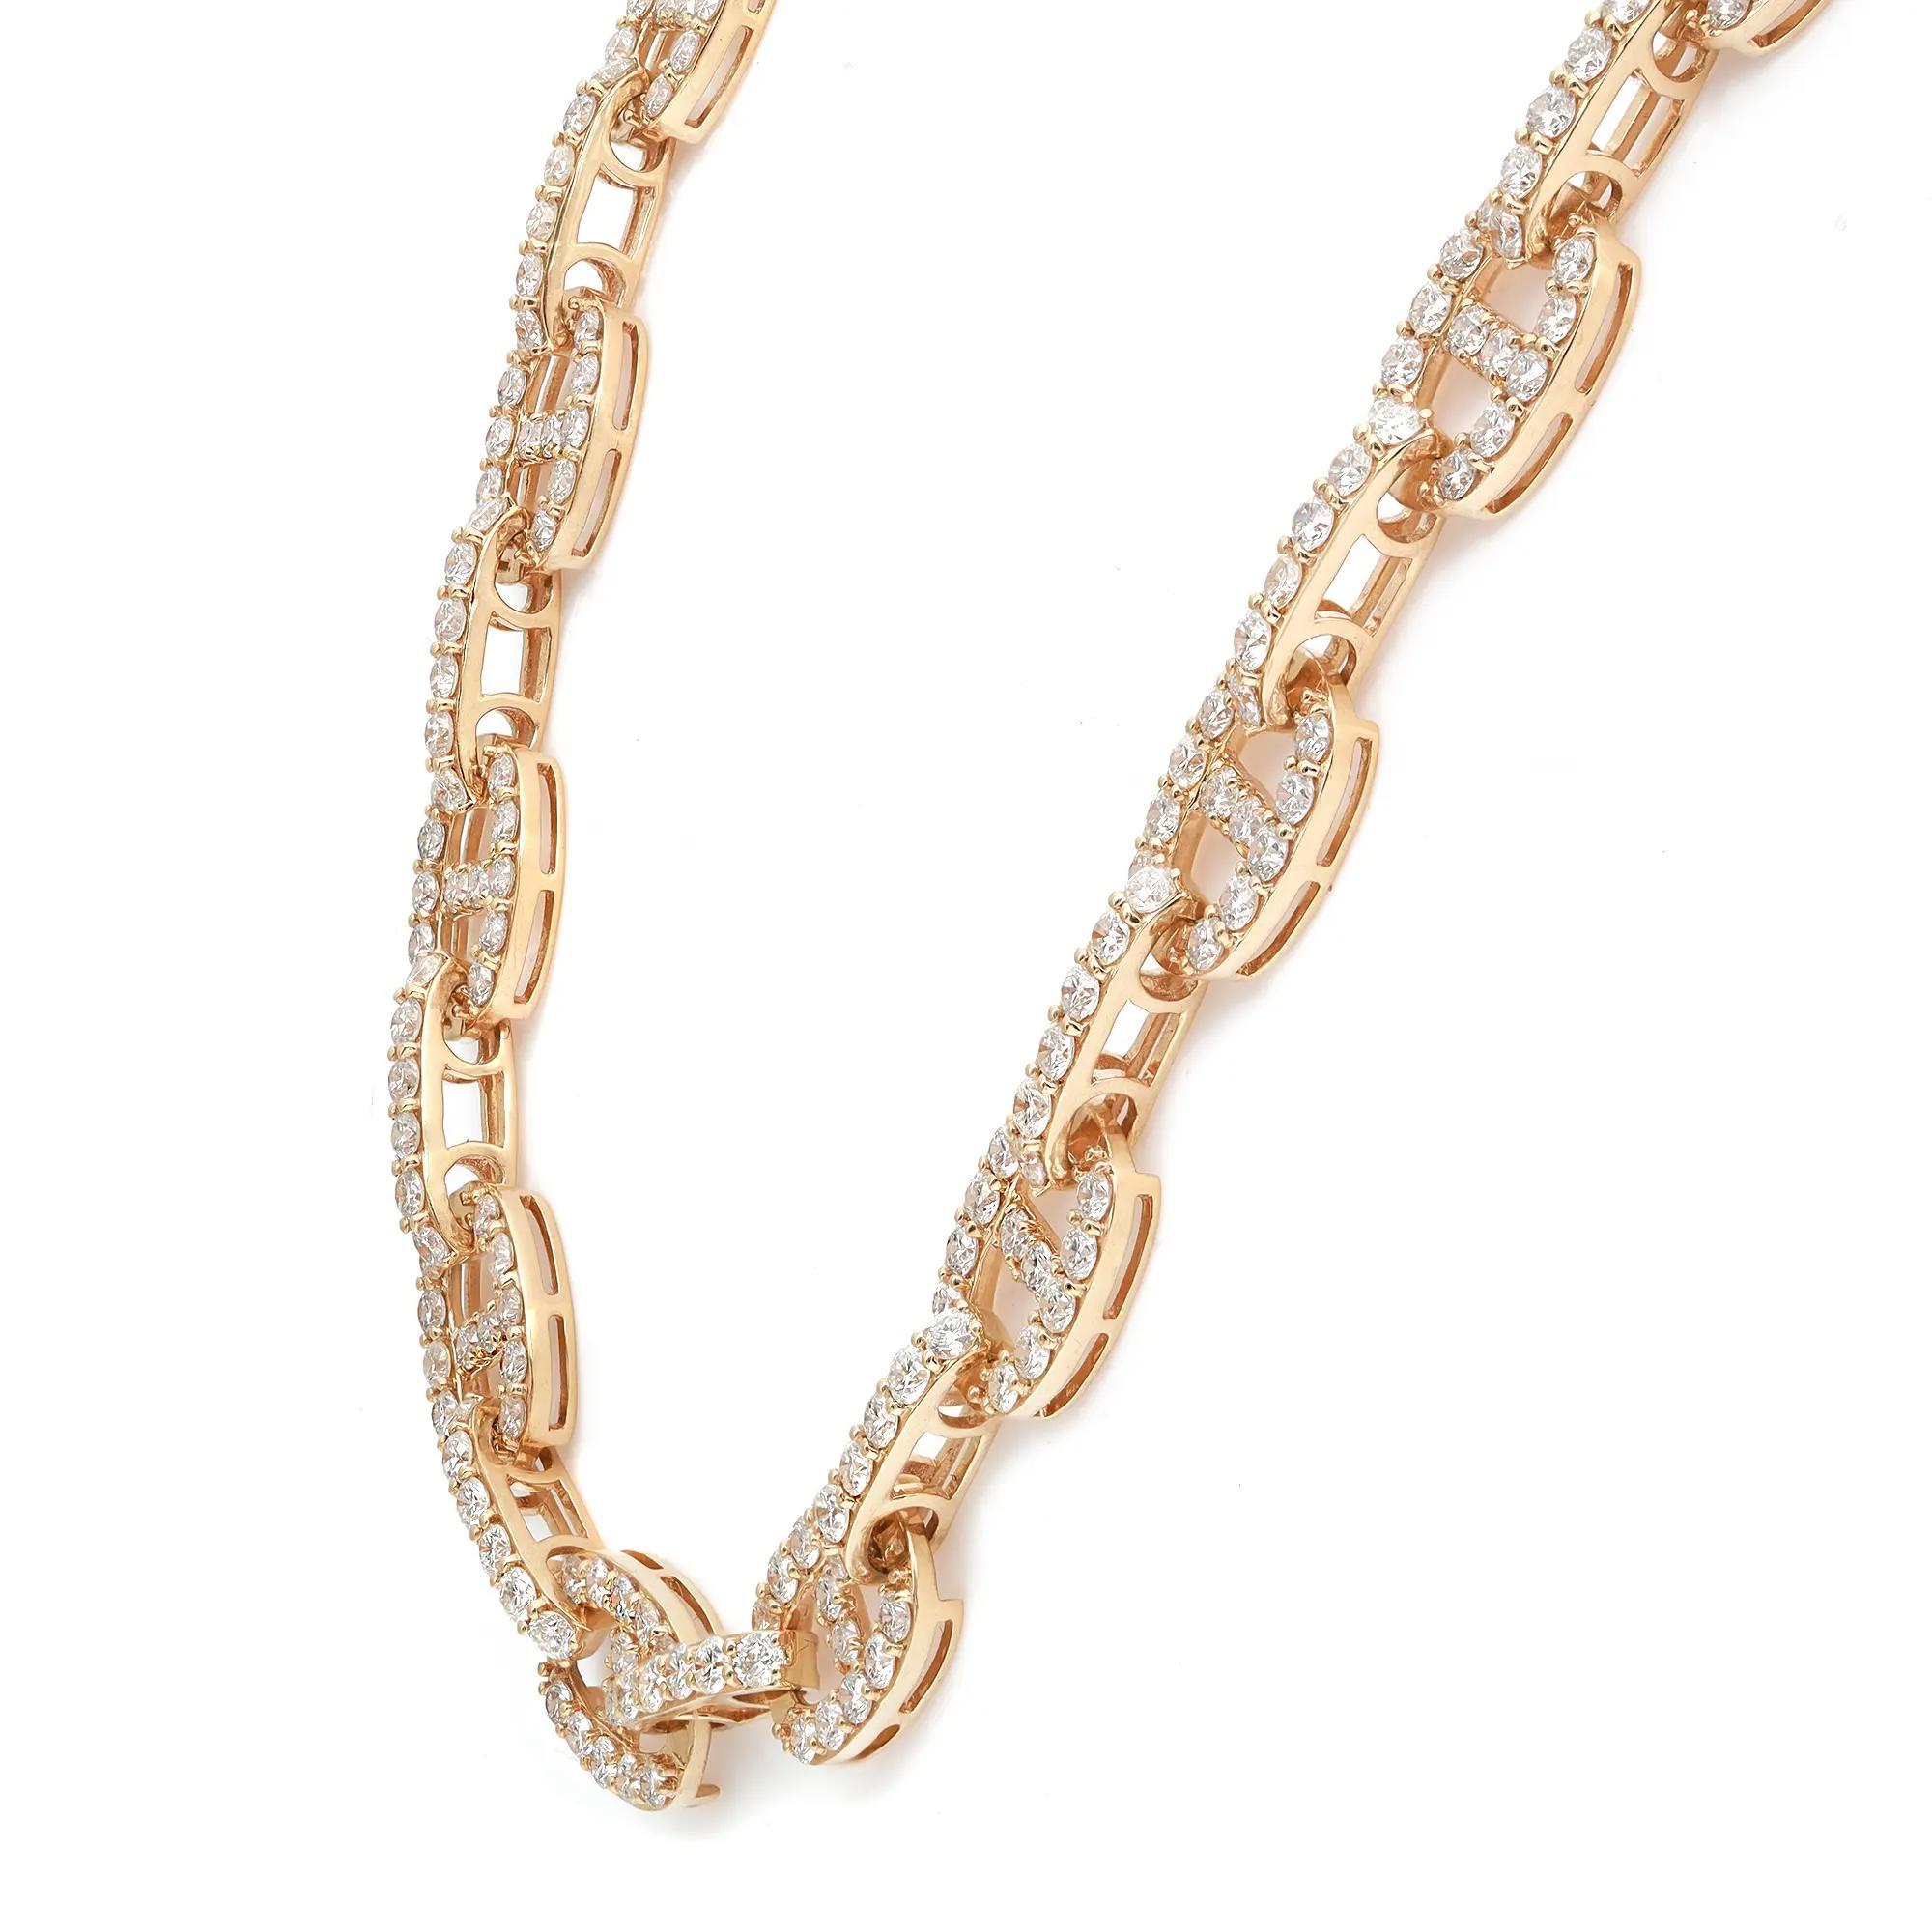 Modern Round Cut Diamond Link Chain Neckalce 18K Yellow Gold 14.95Cttw 17.5 Inches For Sale